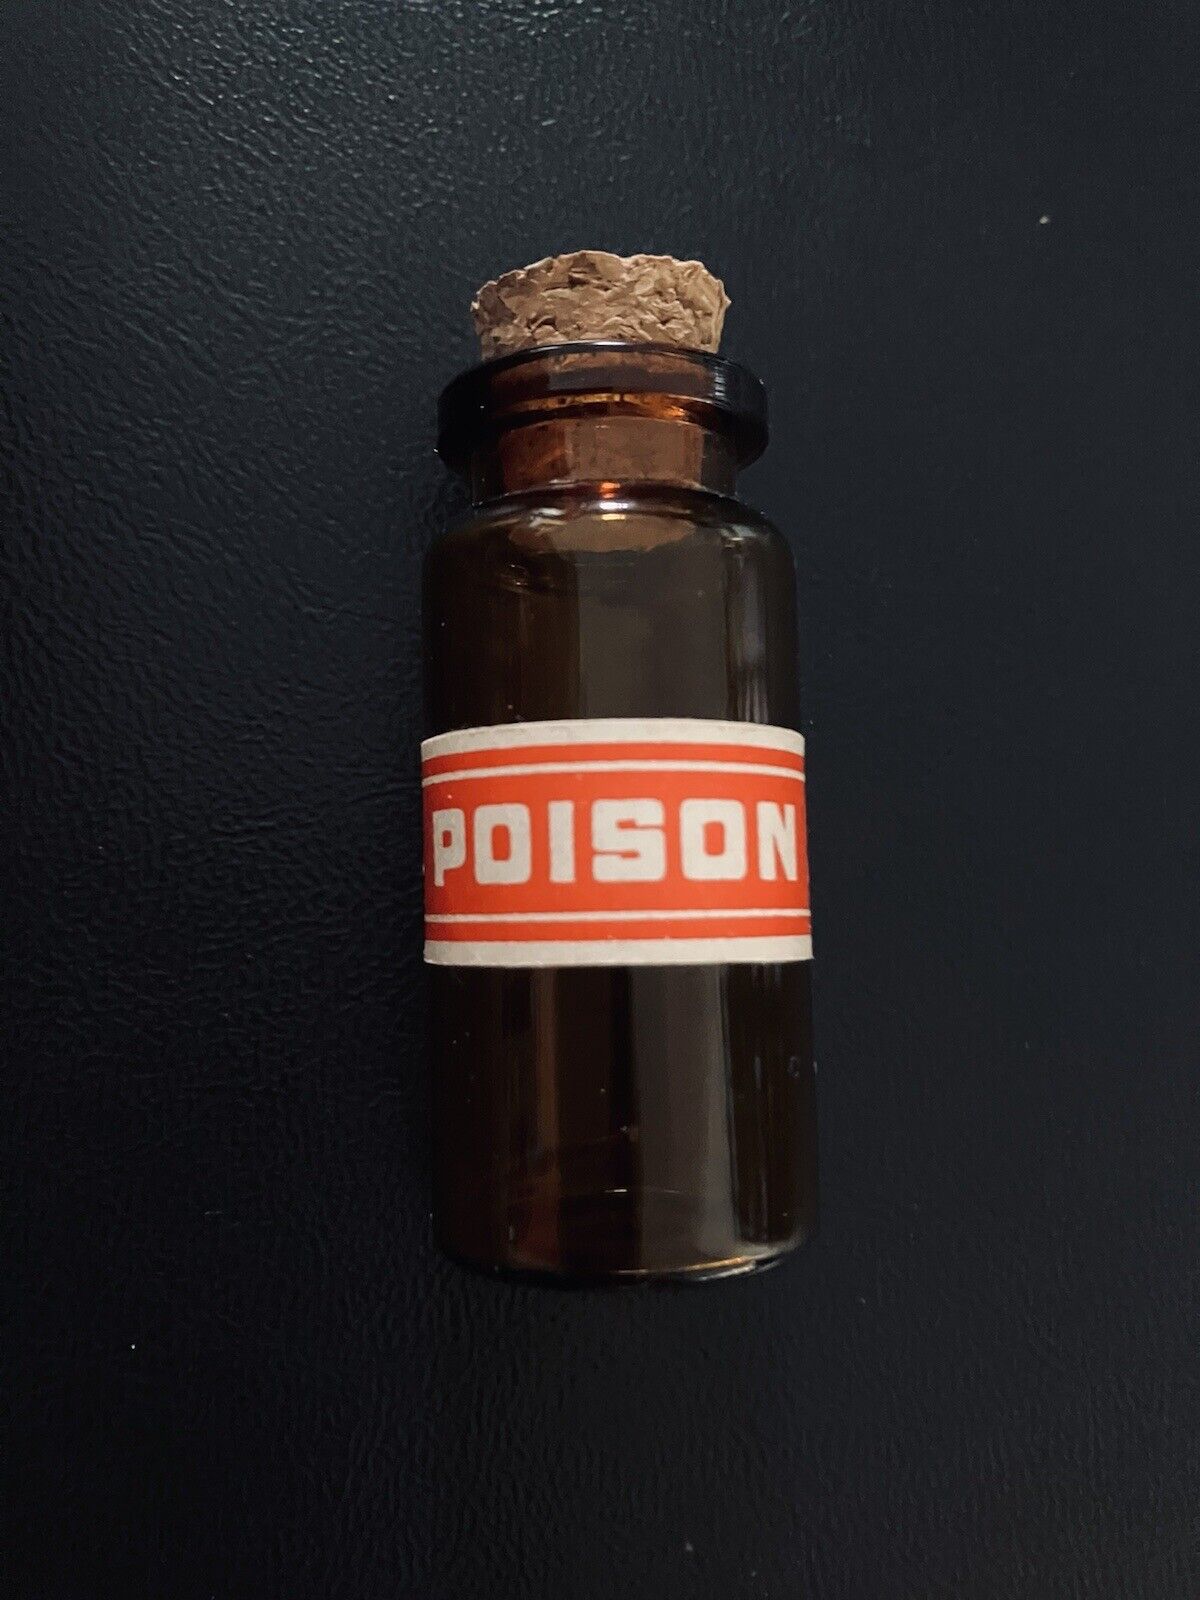 Vintage Poison Vial - Skull and Crossbones “POISON” Label - VERY RARE